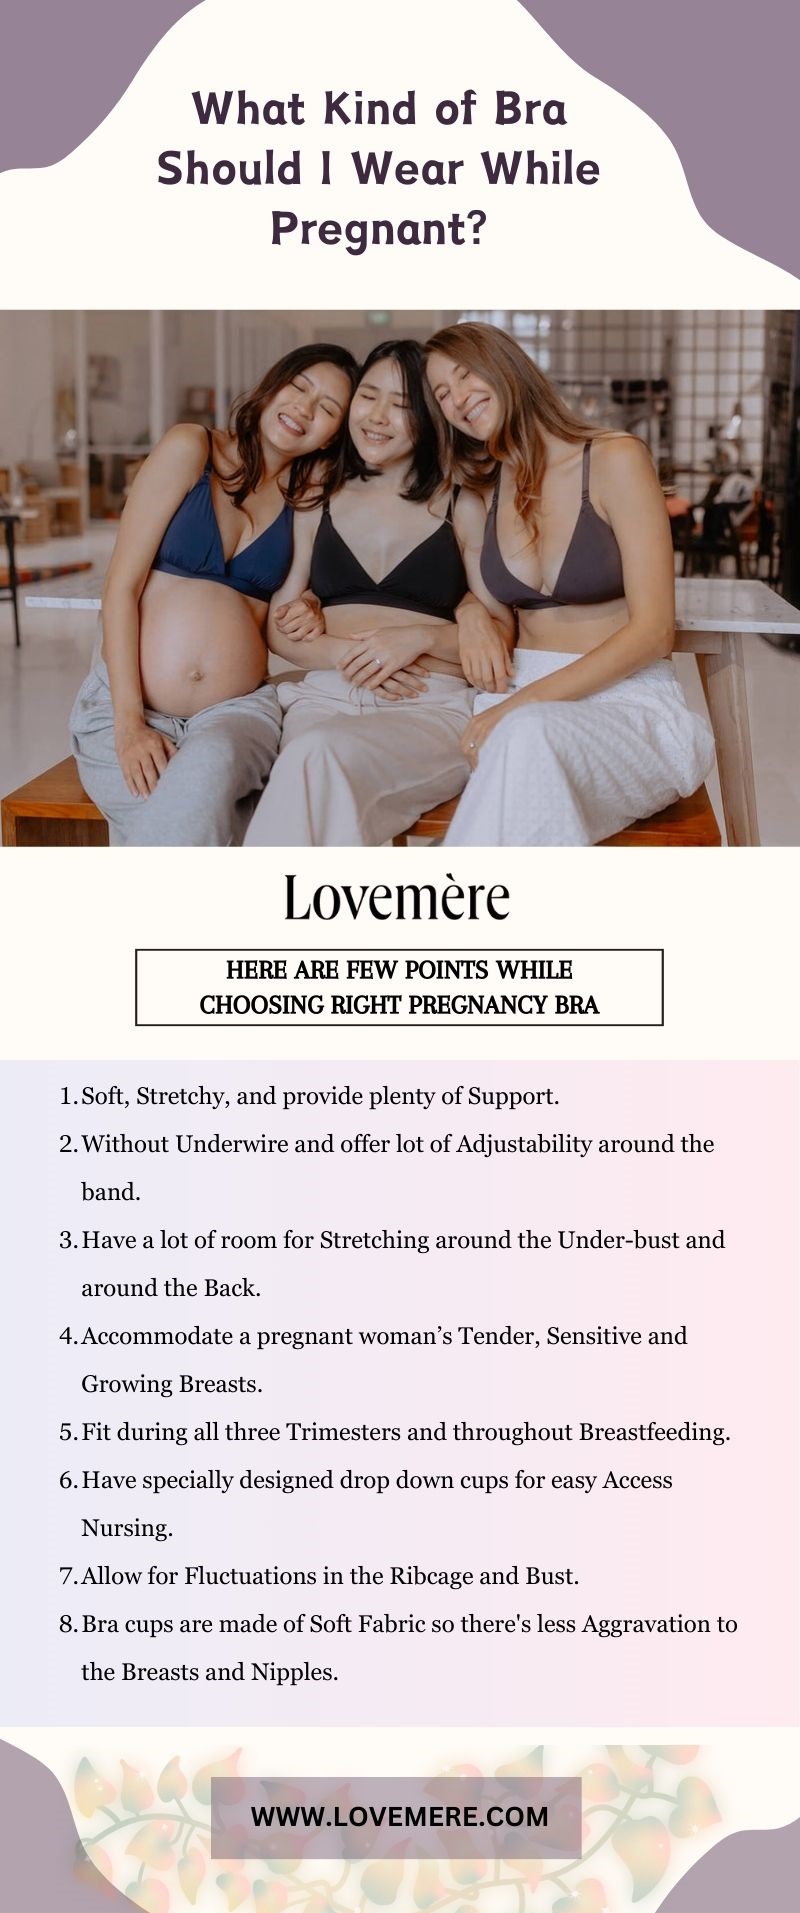 What Kind of Bra Should I Wear While Pregnant?